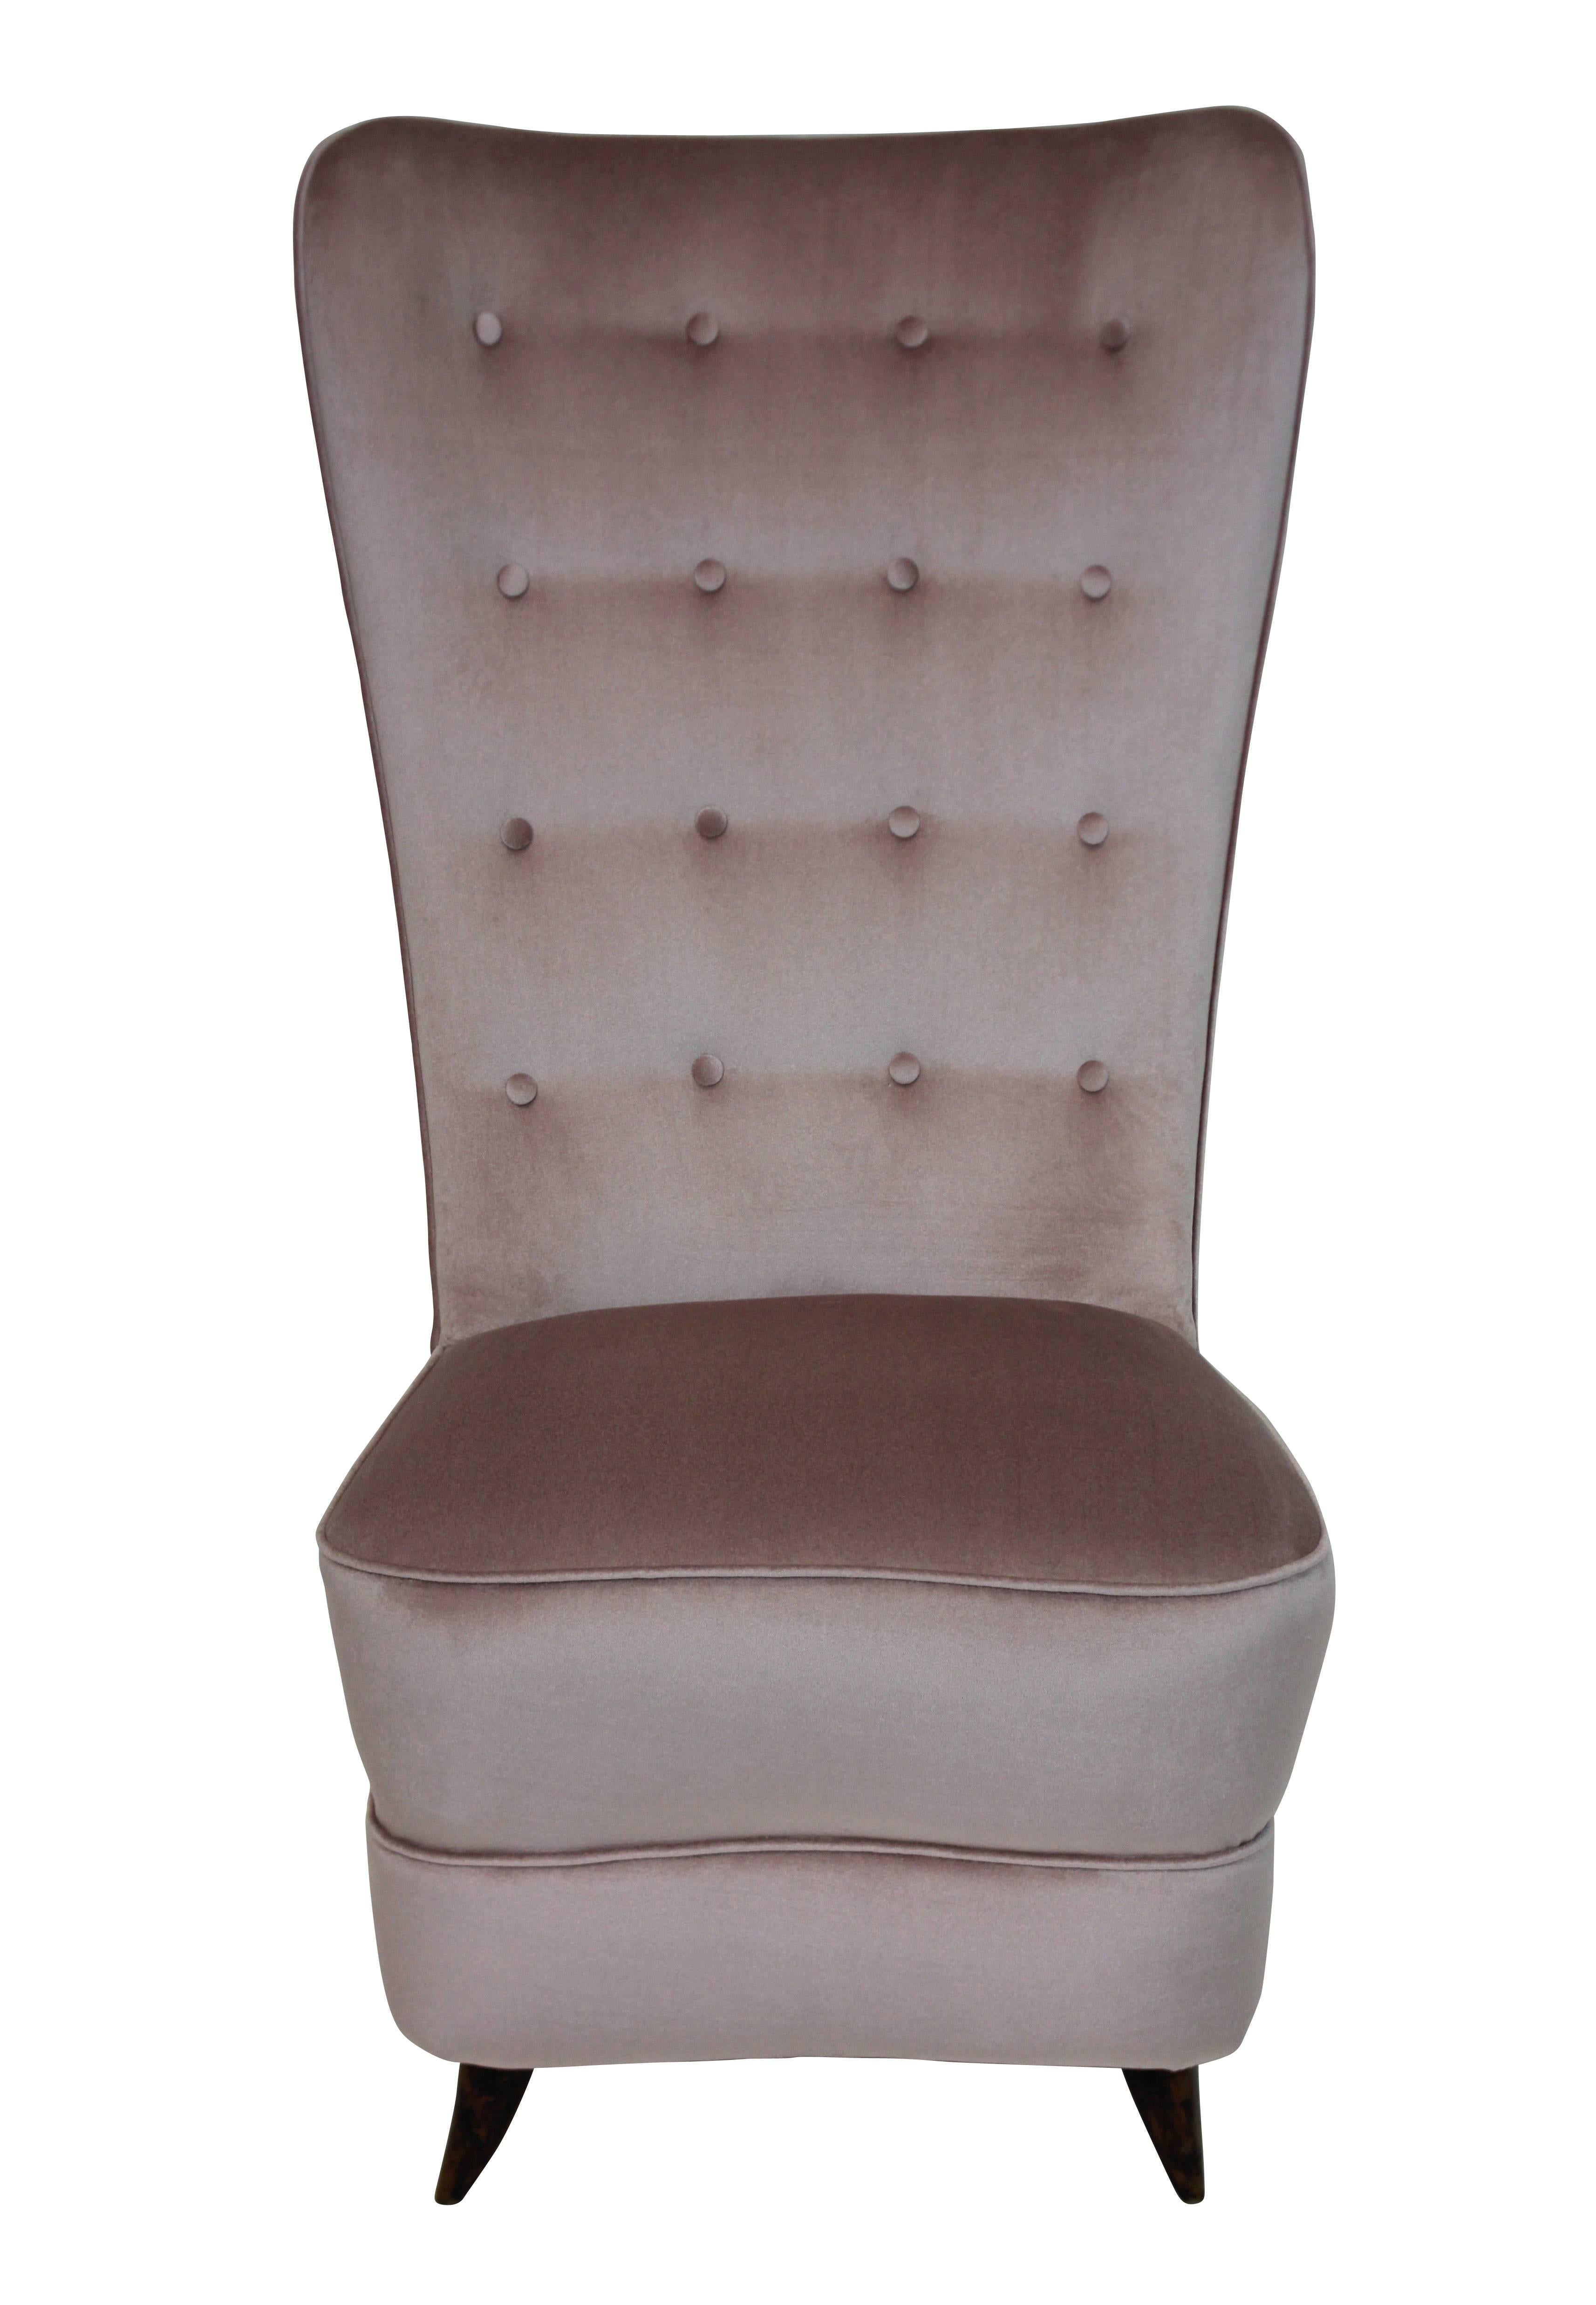 A Hollywood Regency bedroom chair with gently curved high button back and unusual legs. Newly upholstered in pale pink velvet.

 